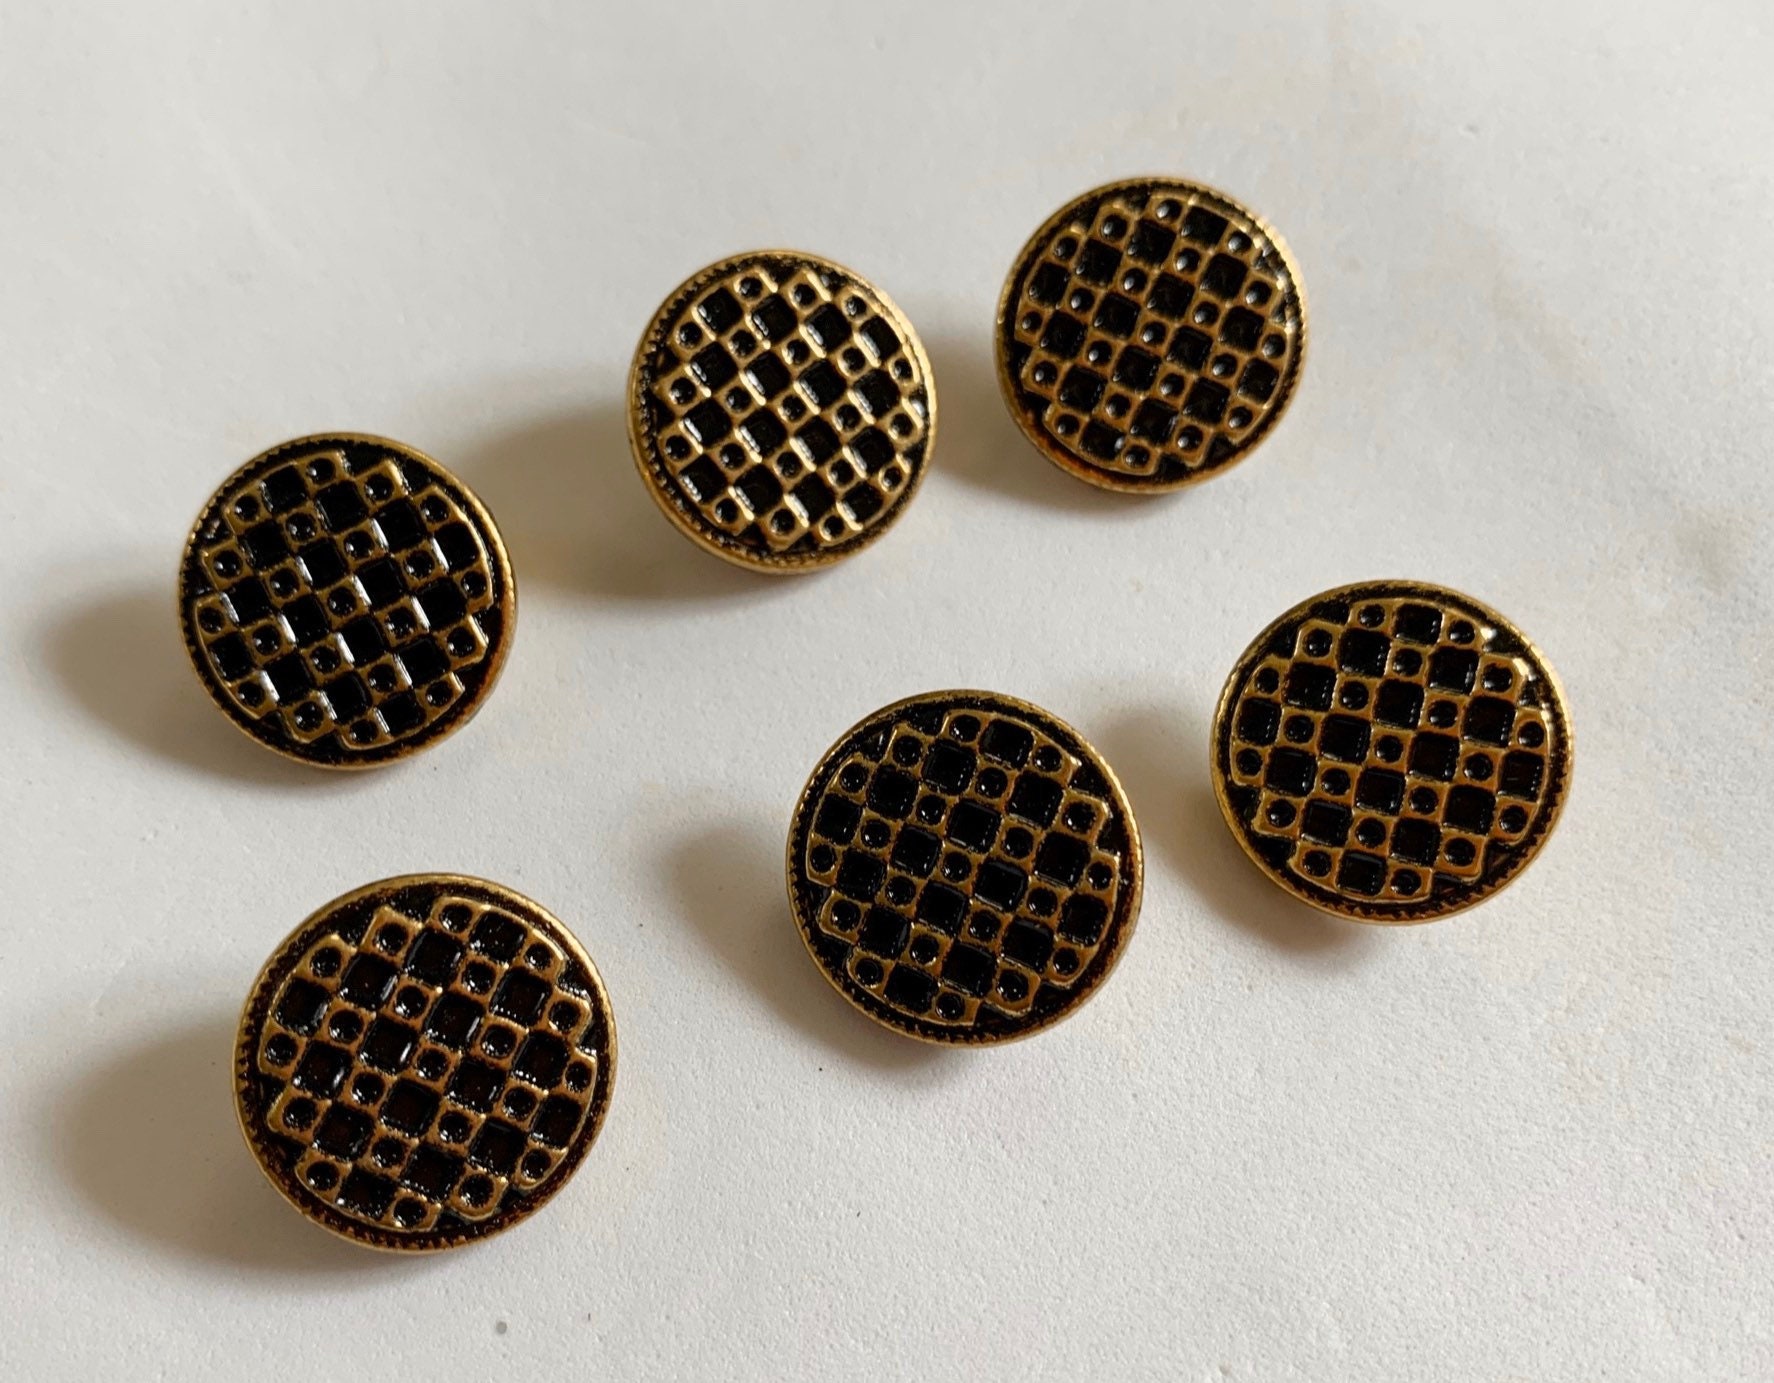 Models Gold Buttons,metal Buttons,gold Buttons for Knitting With